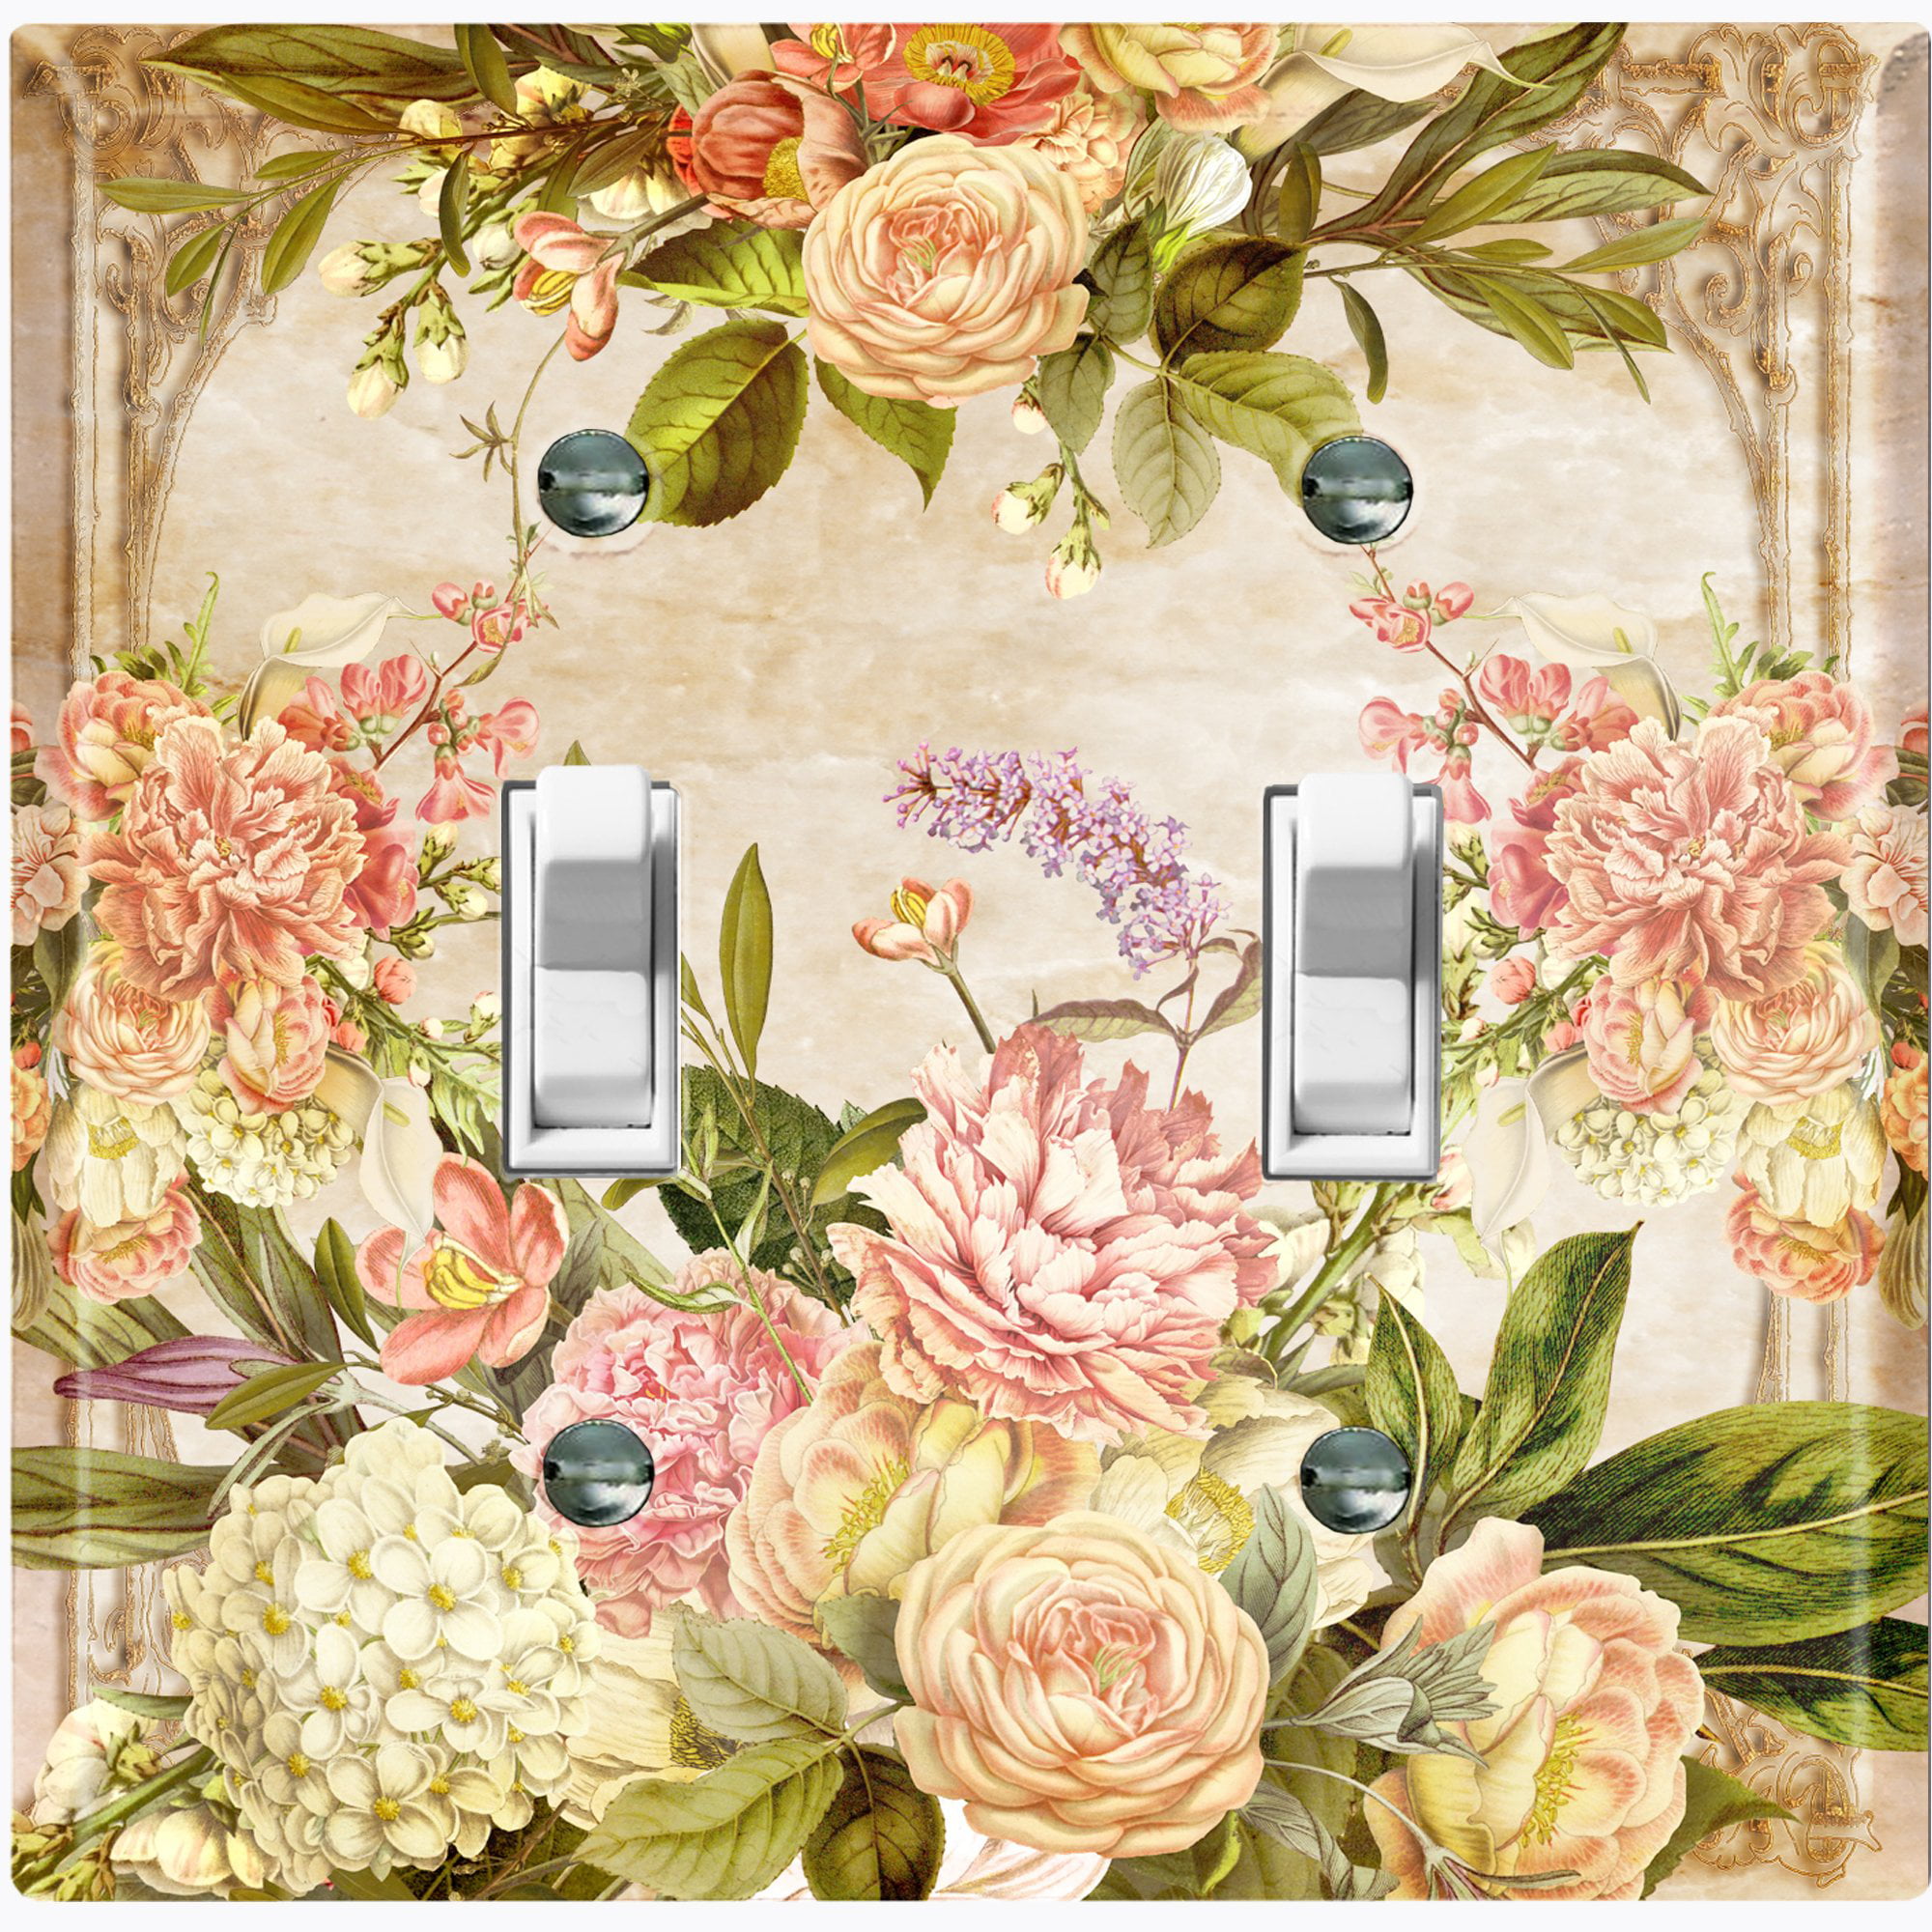 Metal Light Switch Plate Cover Floral Pink And Yellow Roses Shabby Chic Decor 